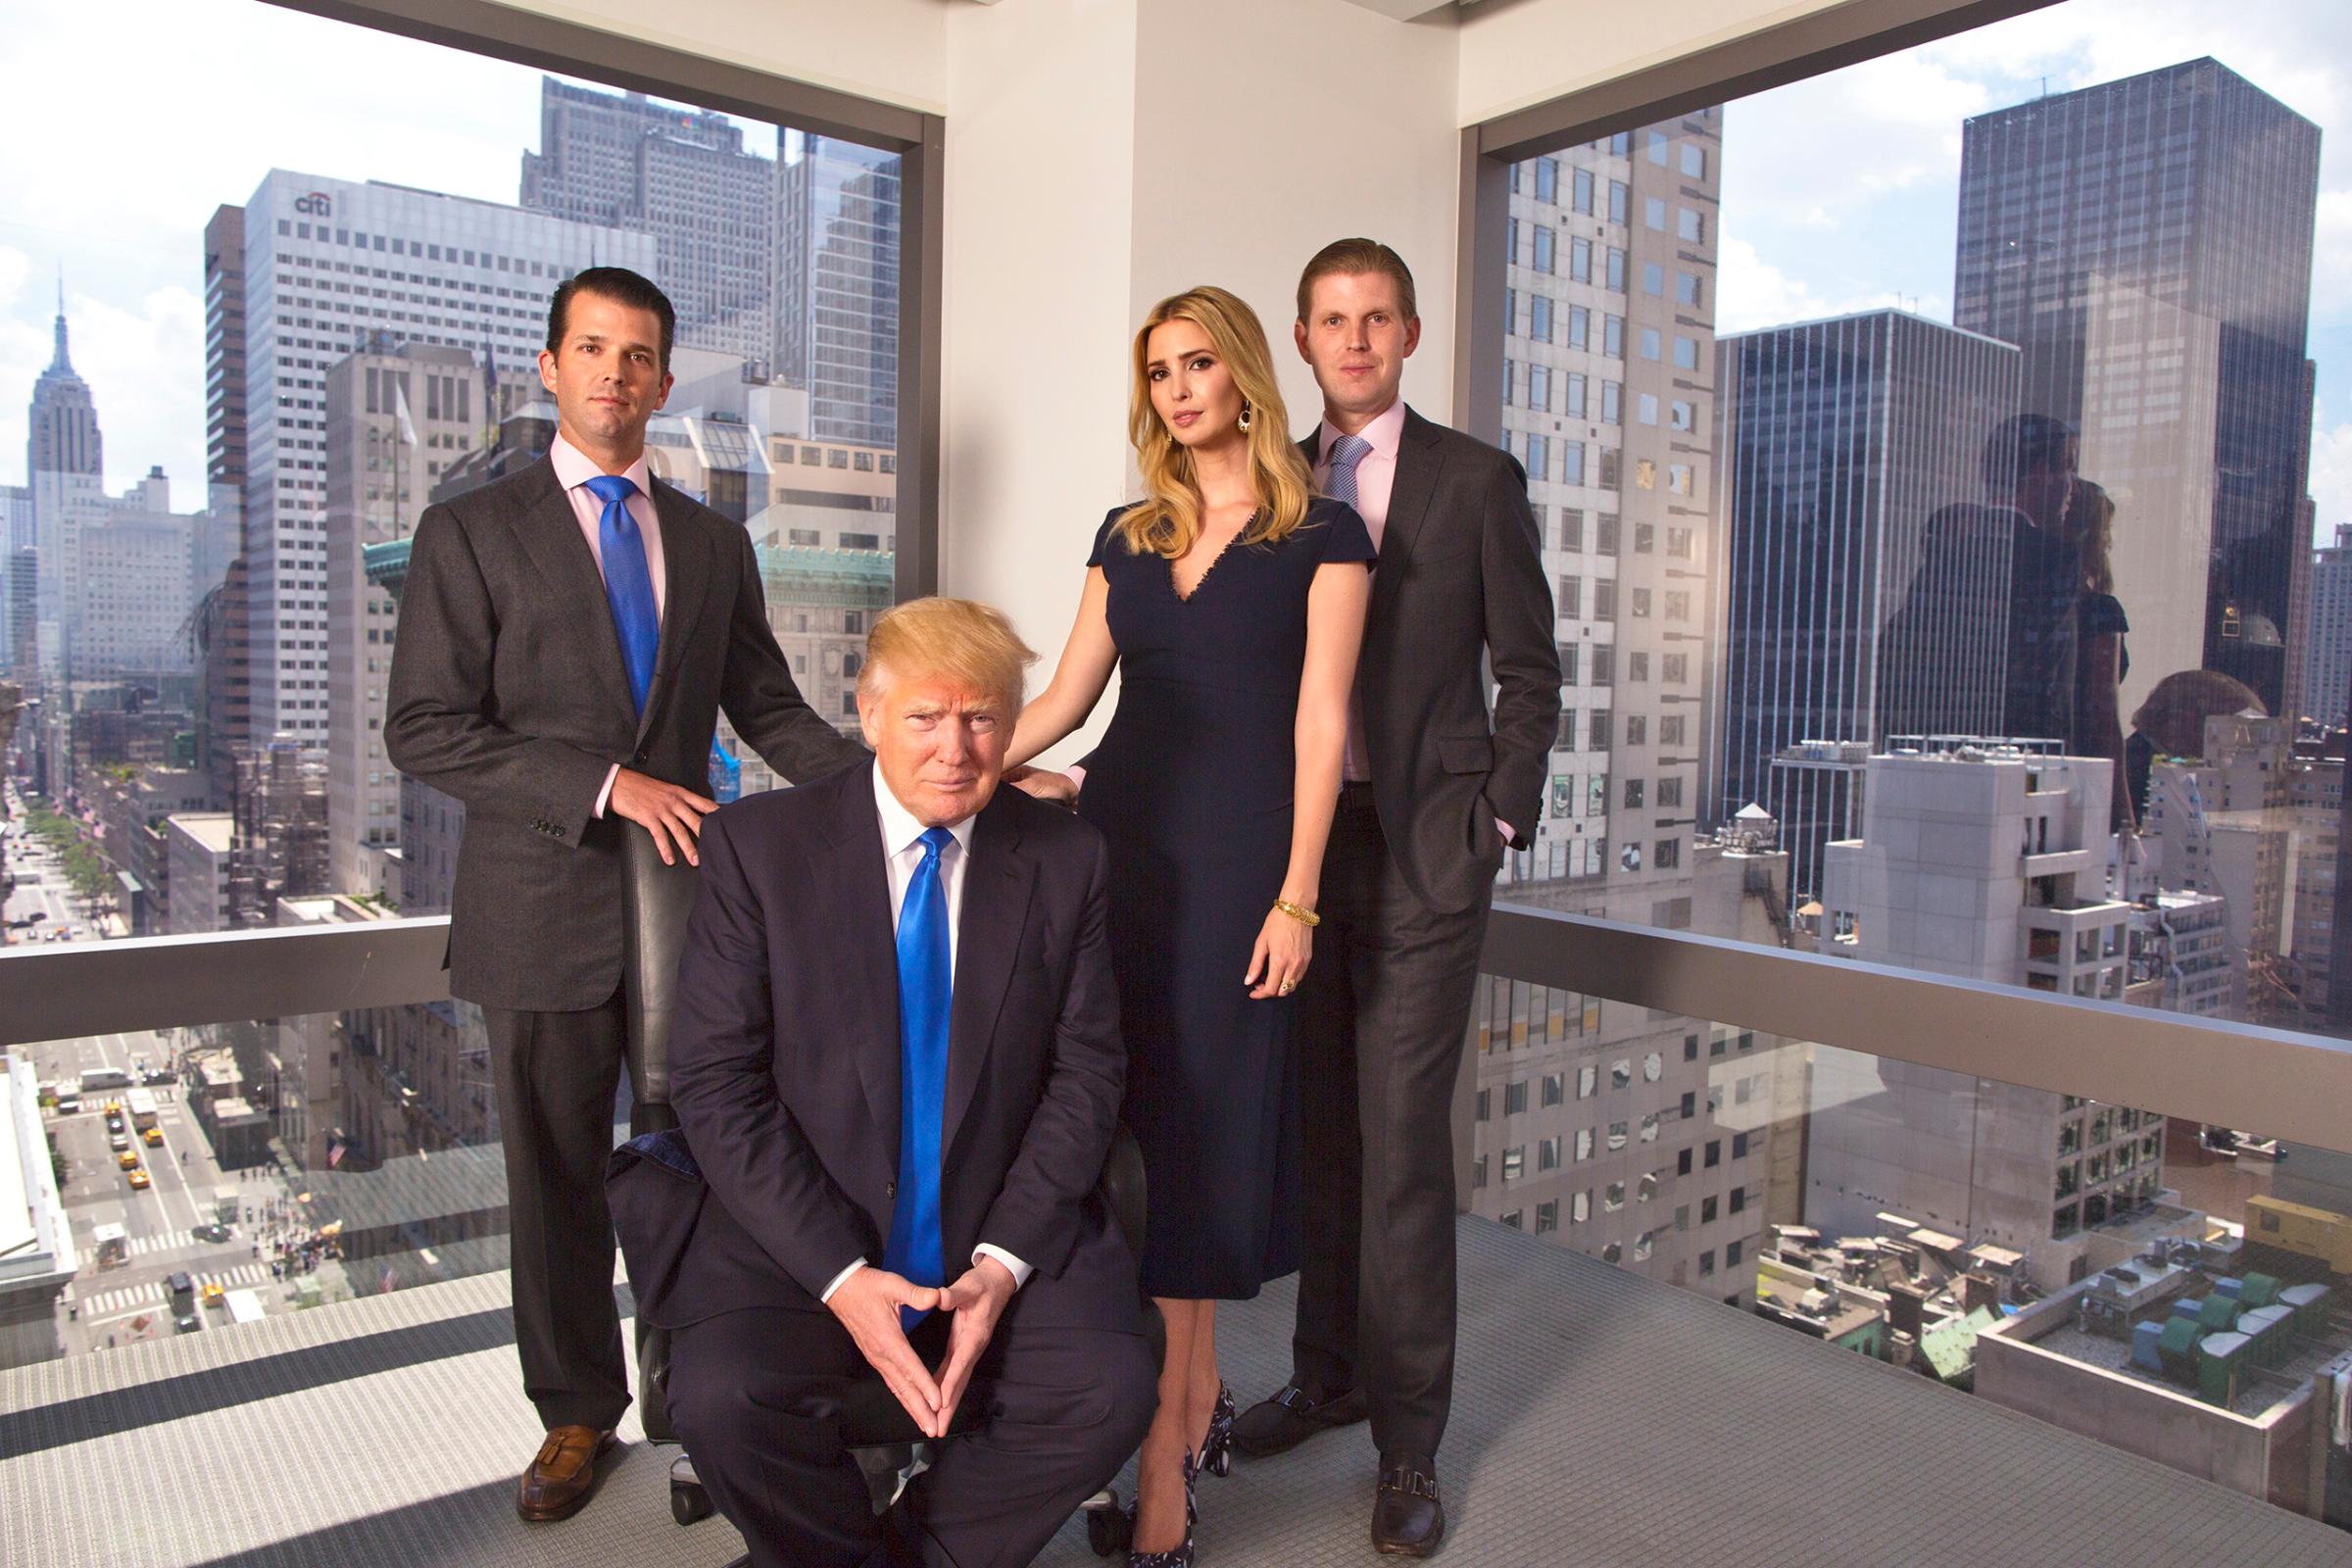 Republican presidential candidate Donald Trump with his children, from left: Donald John “Don” Trump Jr., Ivanka Trump and Eric Trump at Trump Tower in New York City on July 6, 2016.